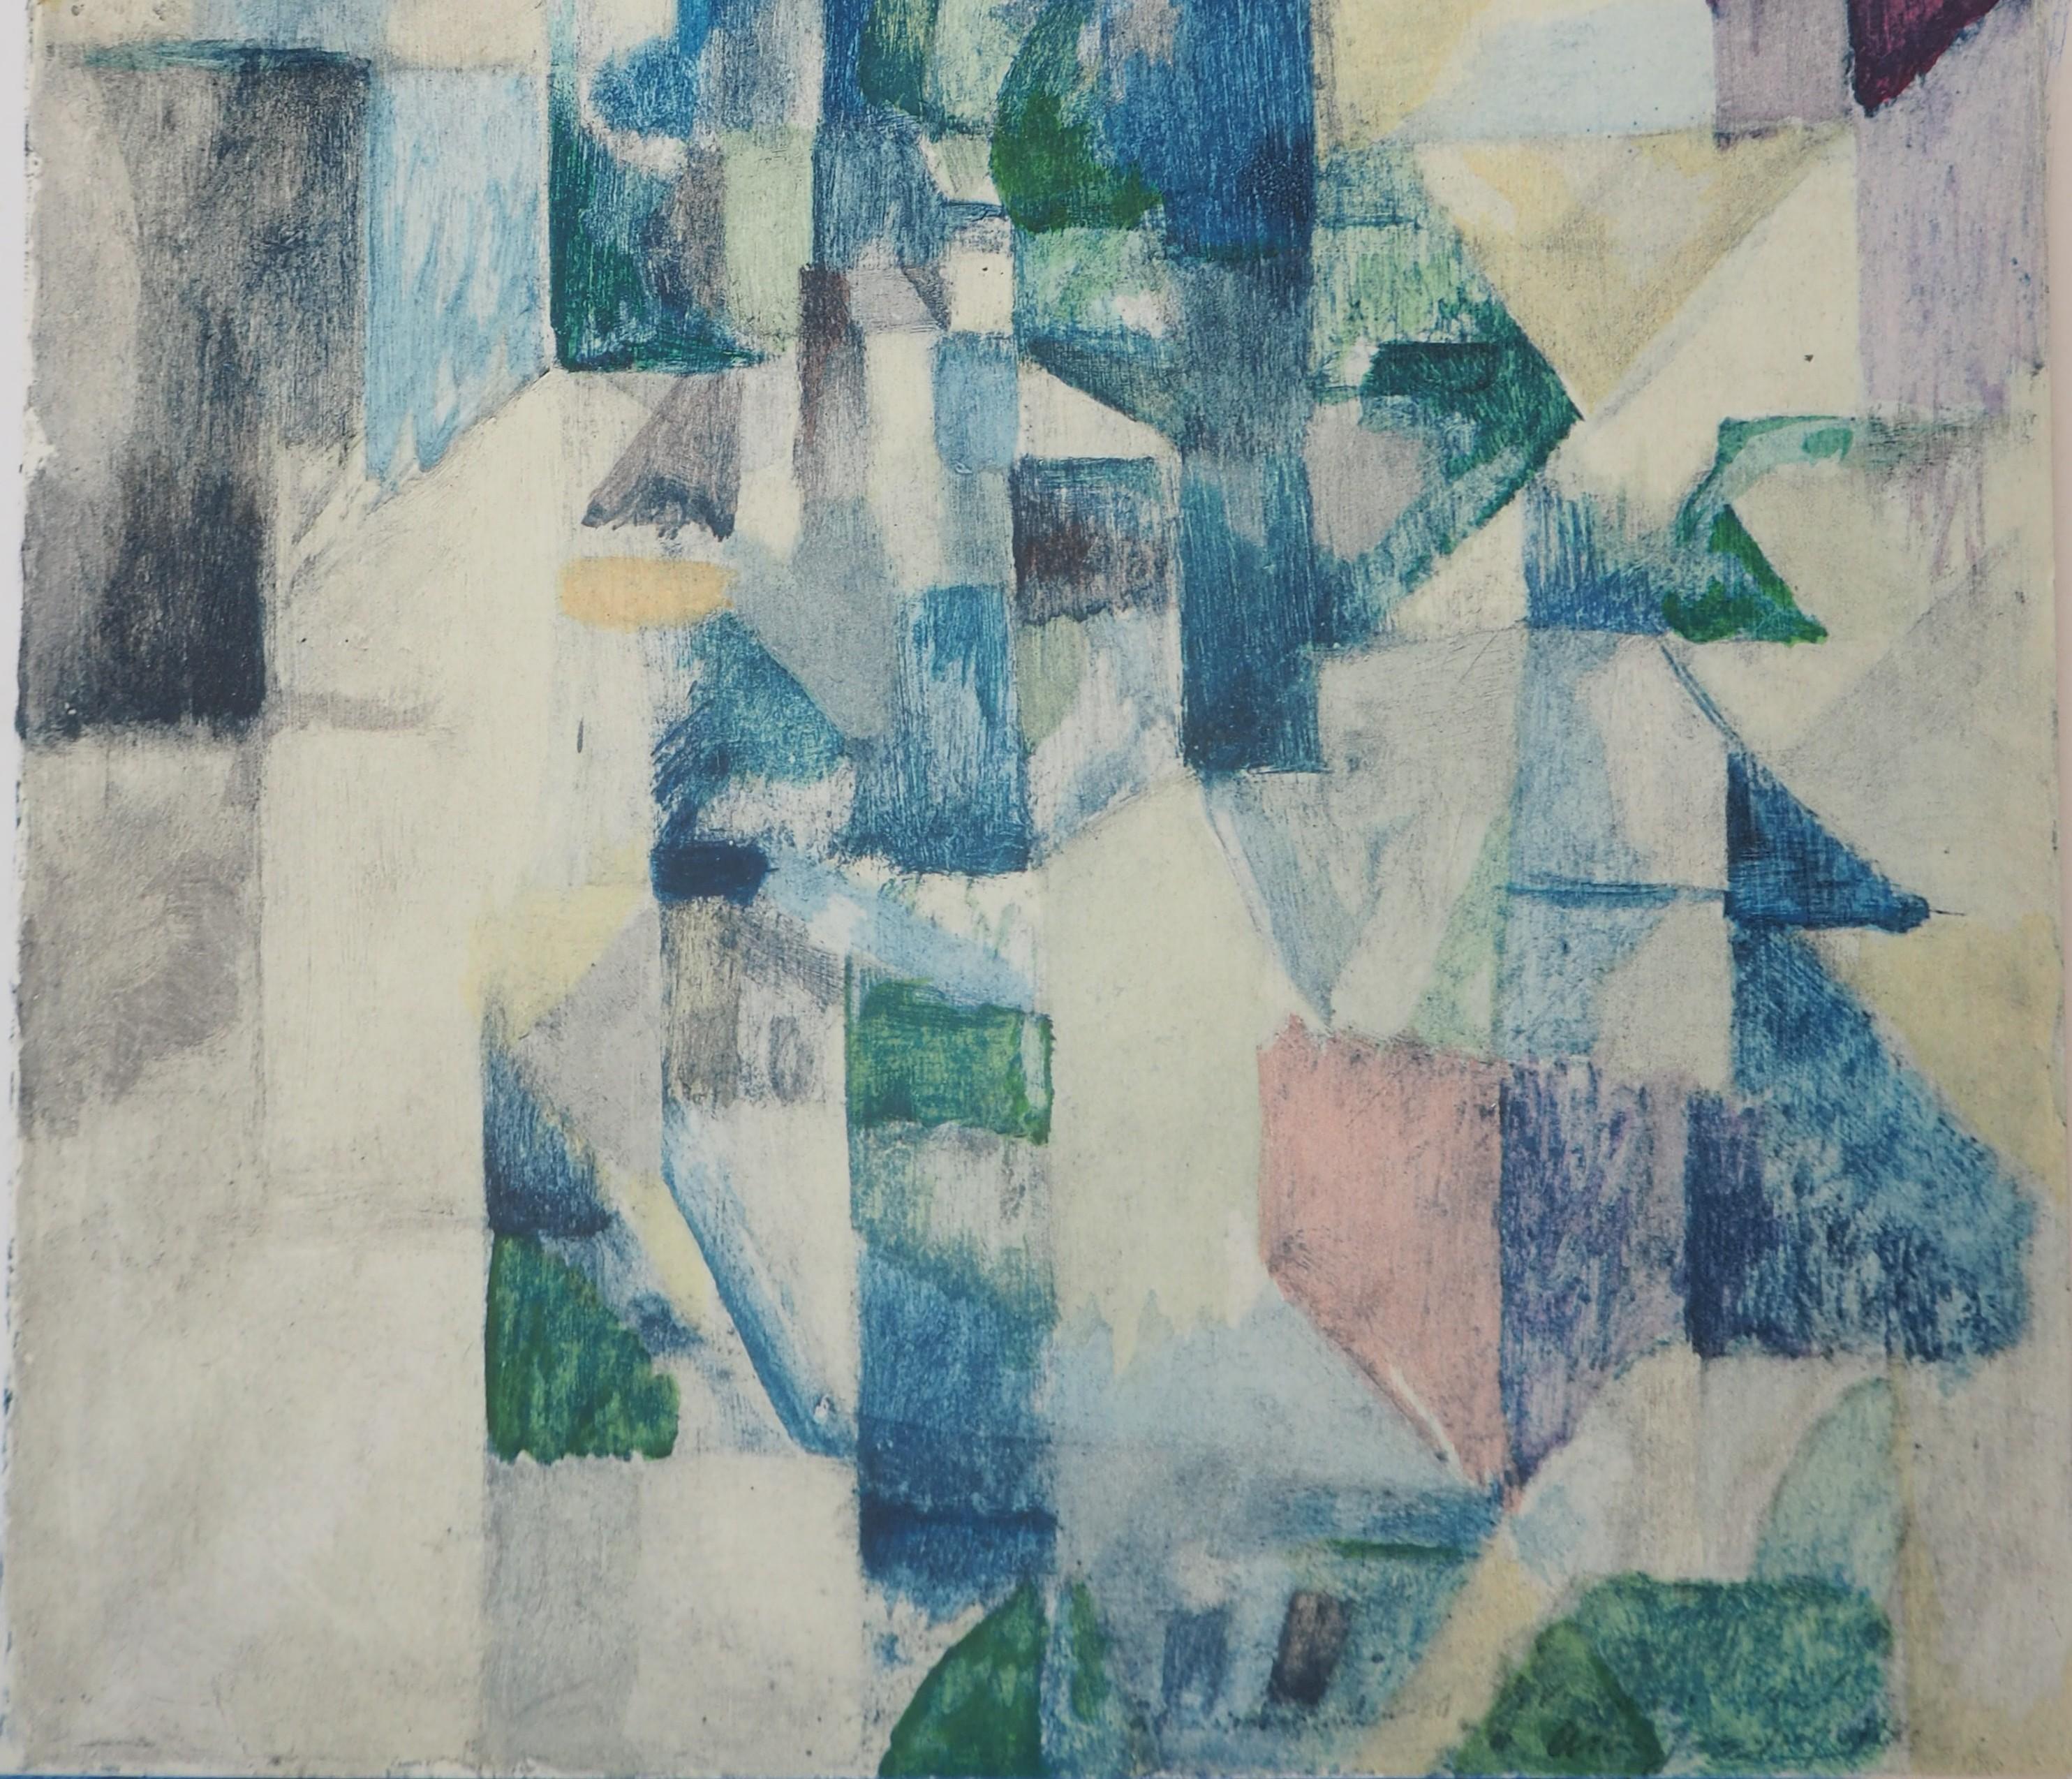 Widow n°2 : Dreamlike Landscape - Lithograph and Stencil, 1957 - Abstract Print by Robert Delaunay